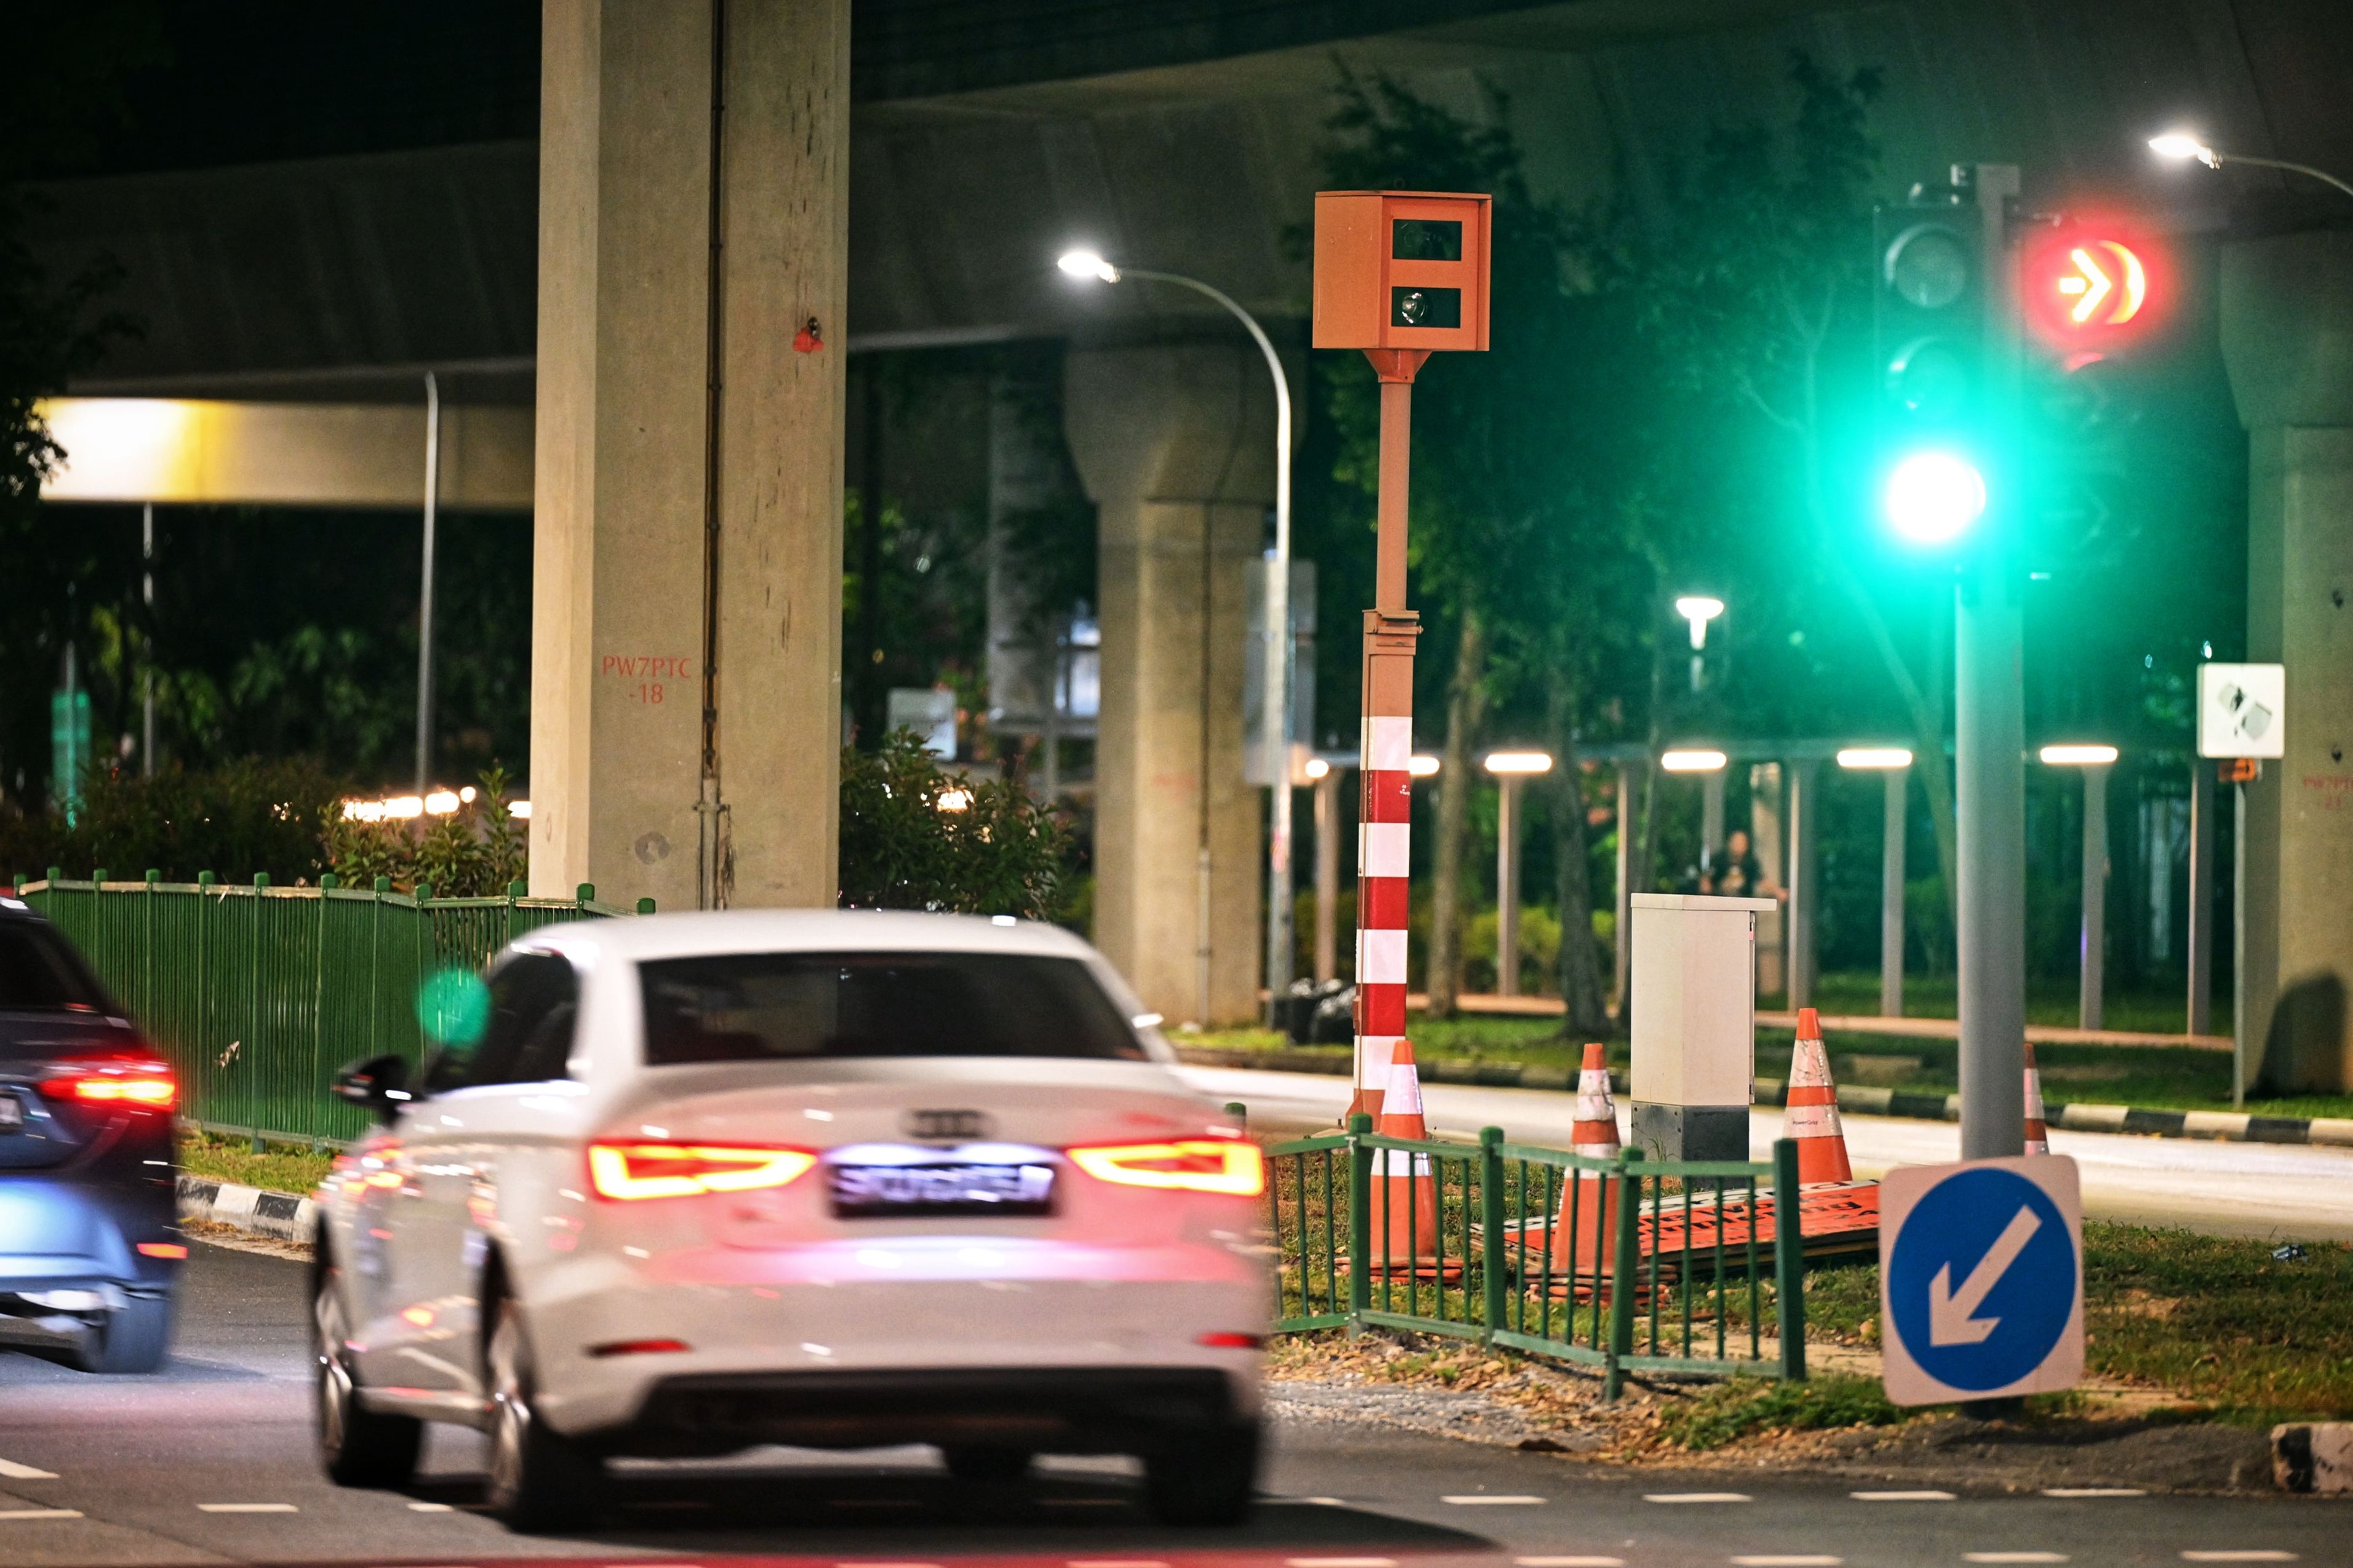 Over 800 speeding violations caught by red-light cameras since function activated on April 1